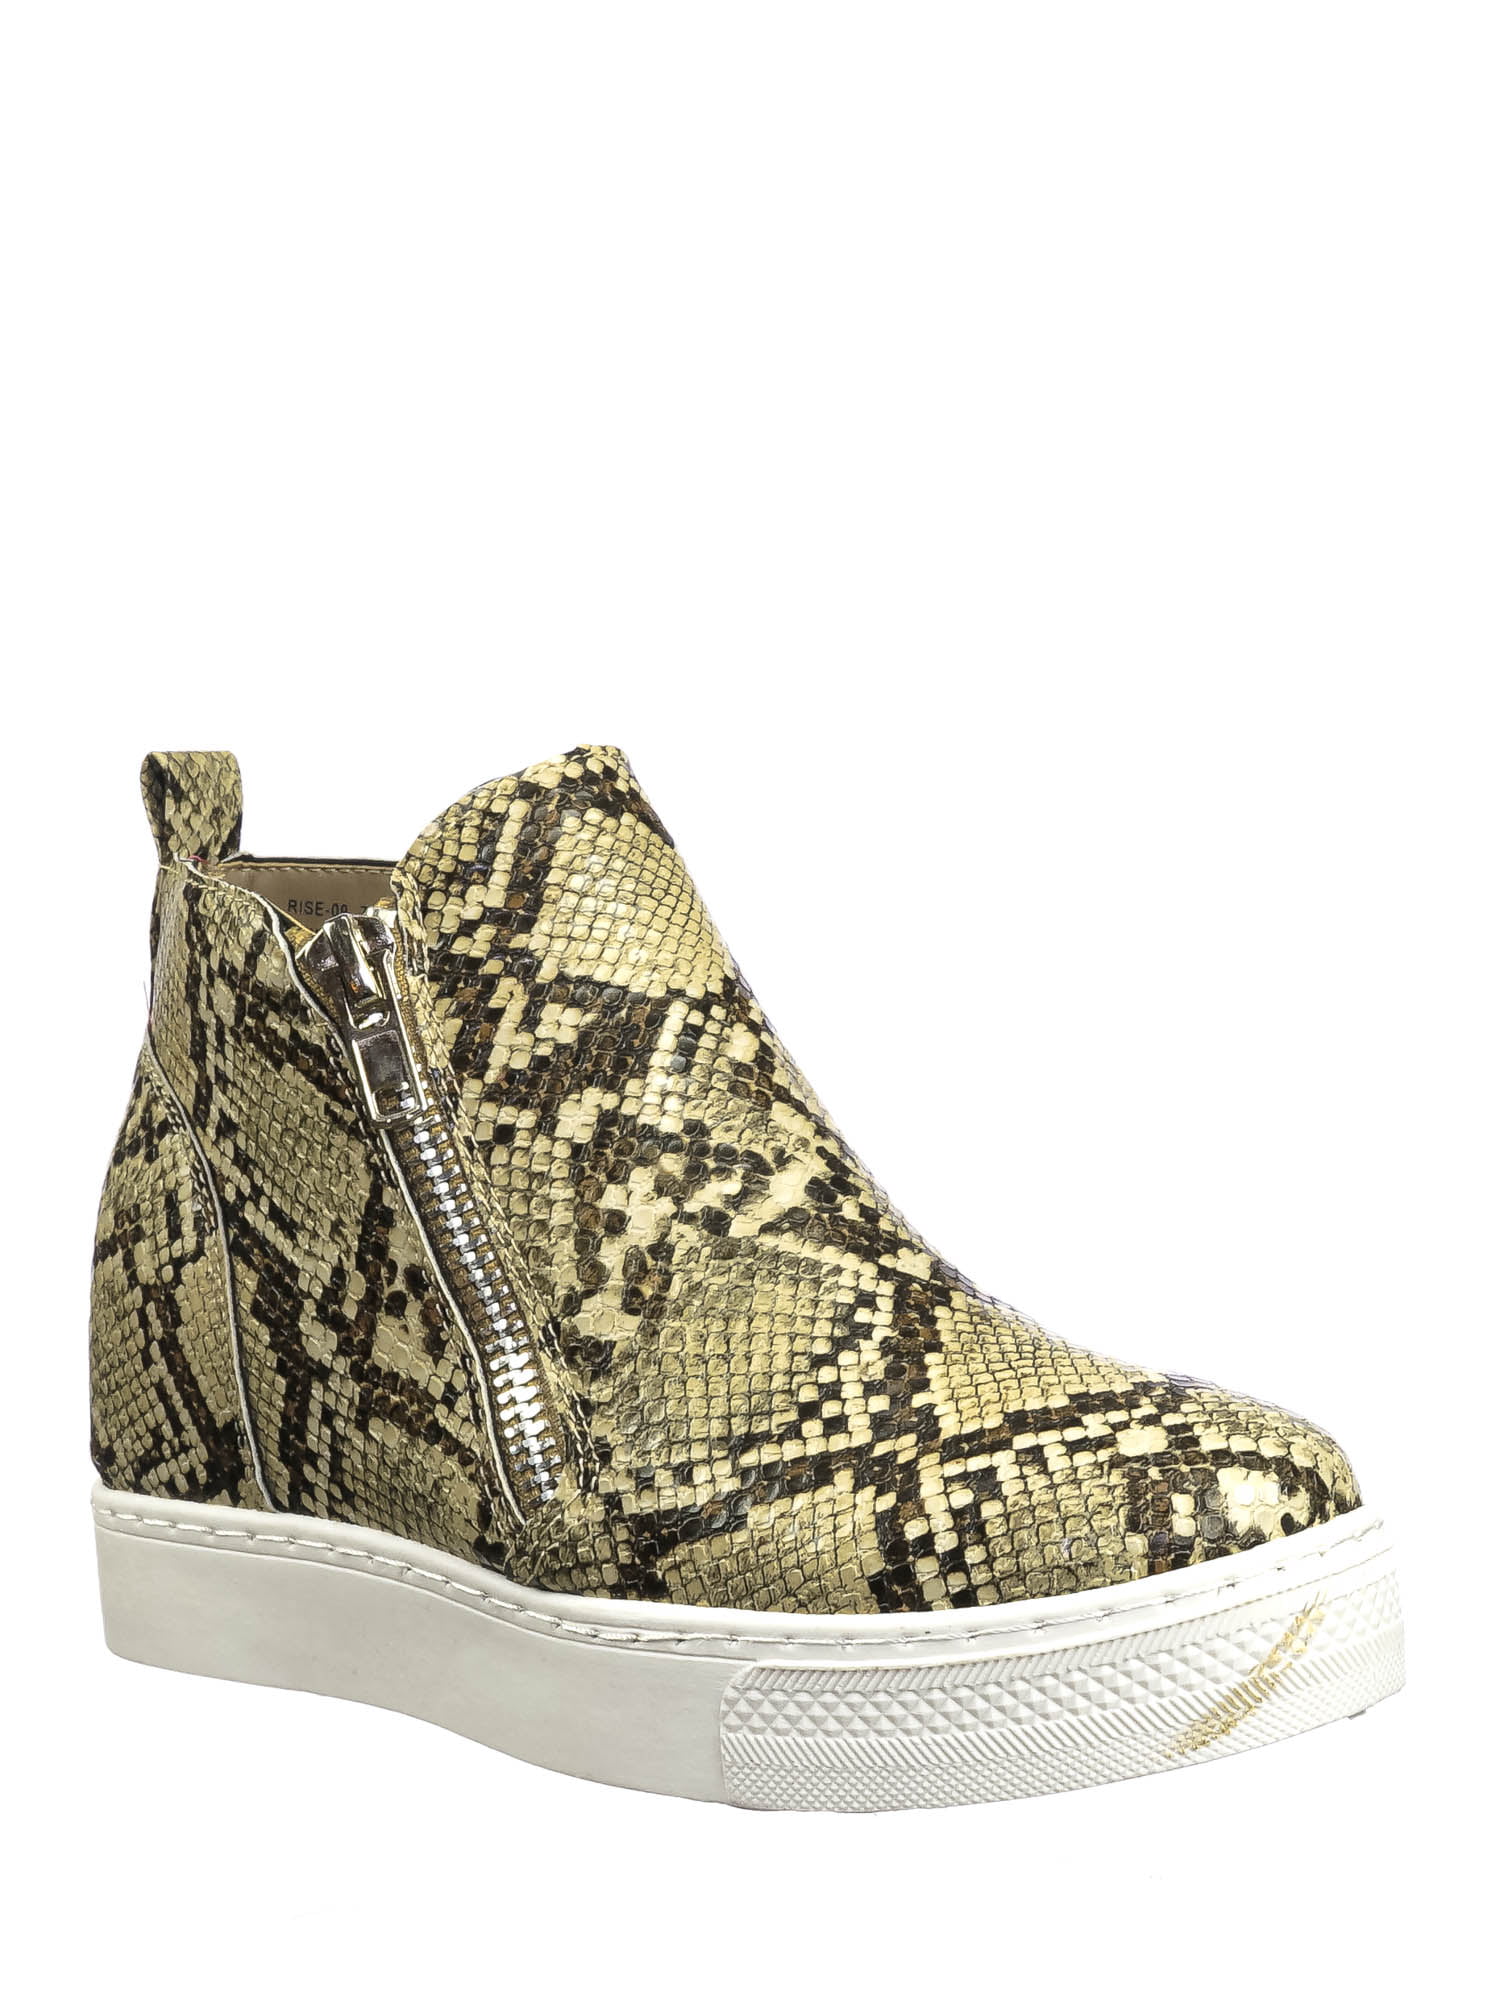 Womens Lace Up Camo High Top Fashion Sneakers Athletic Shoes hidden wedge heel 